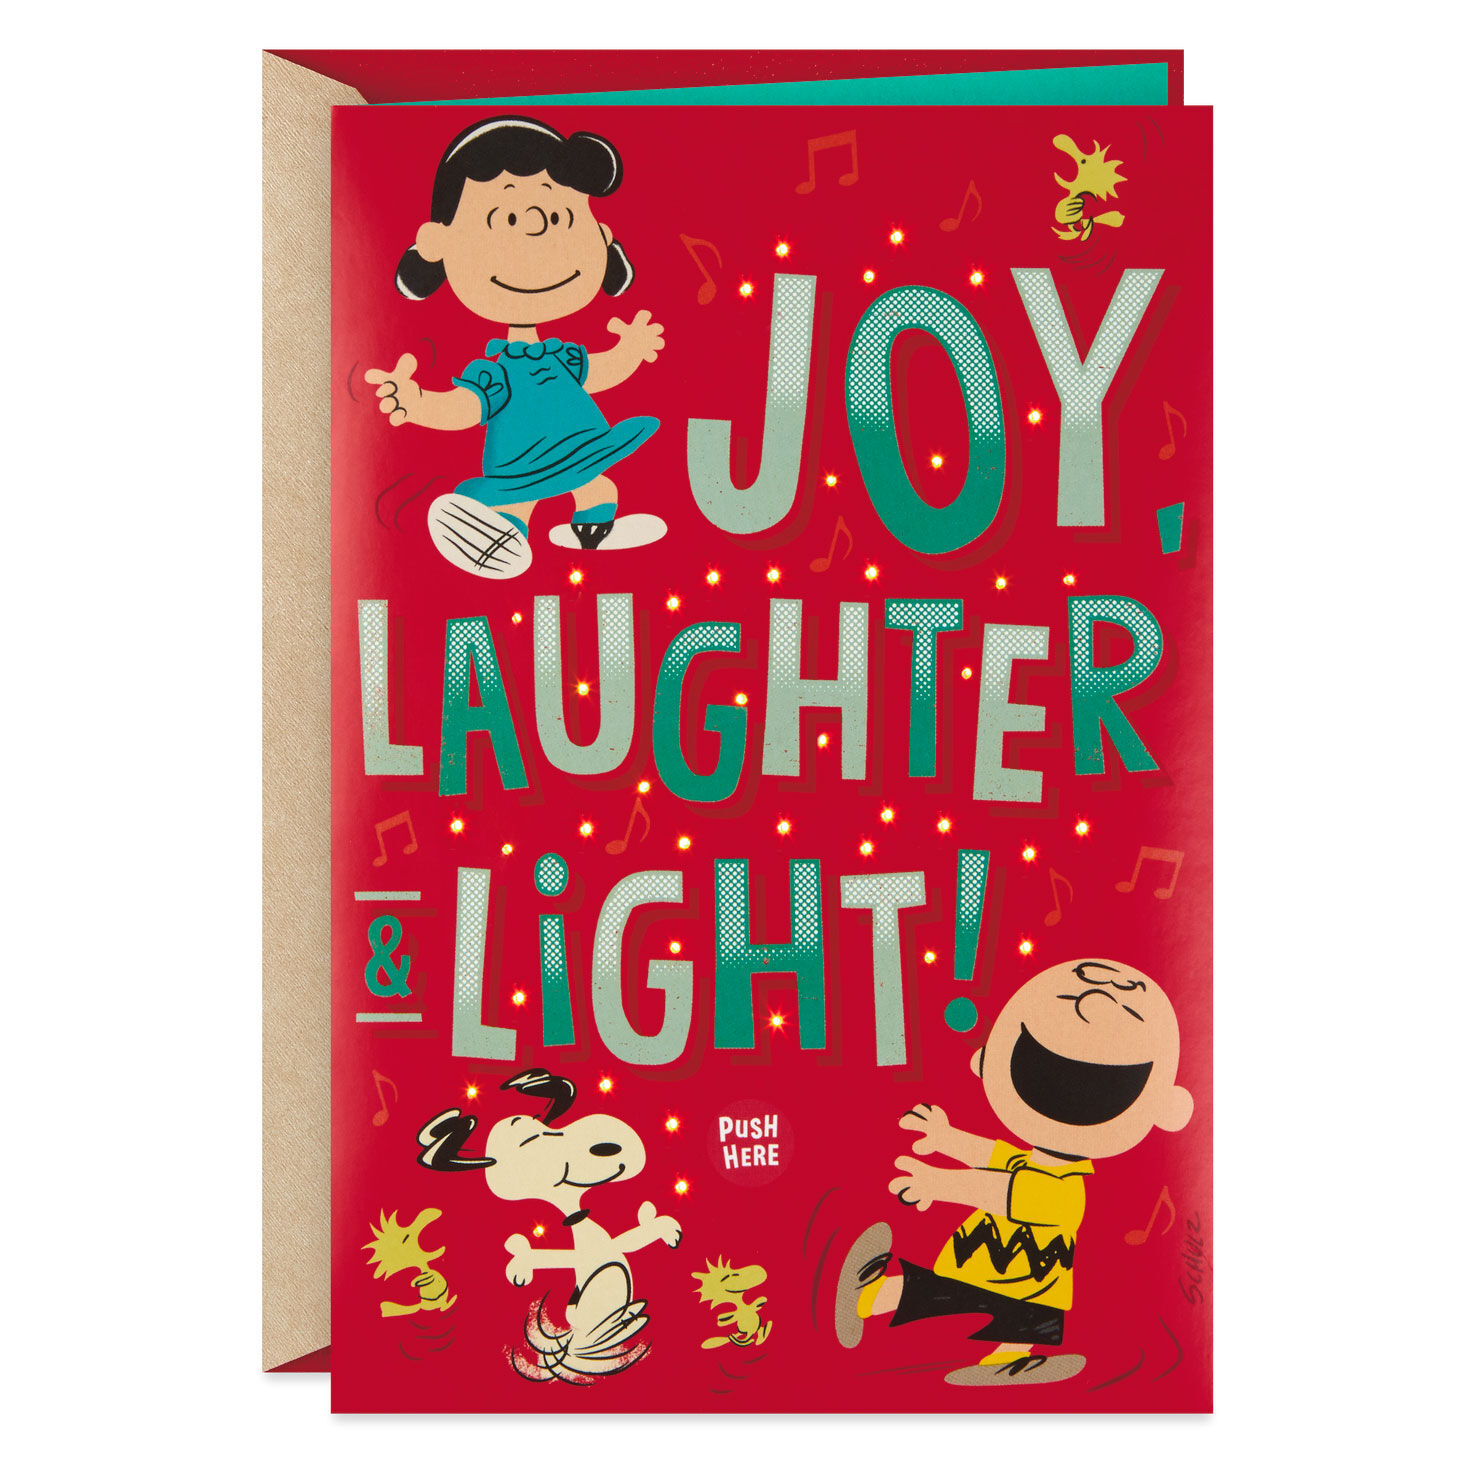 Hallmark Peanuts Valentines Day Card with Light and Sound Plays Linus and Lucy by Vince Guaraldi 